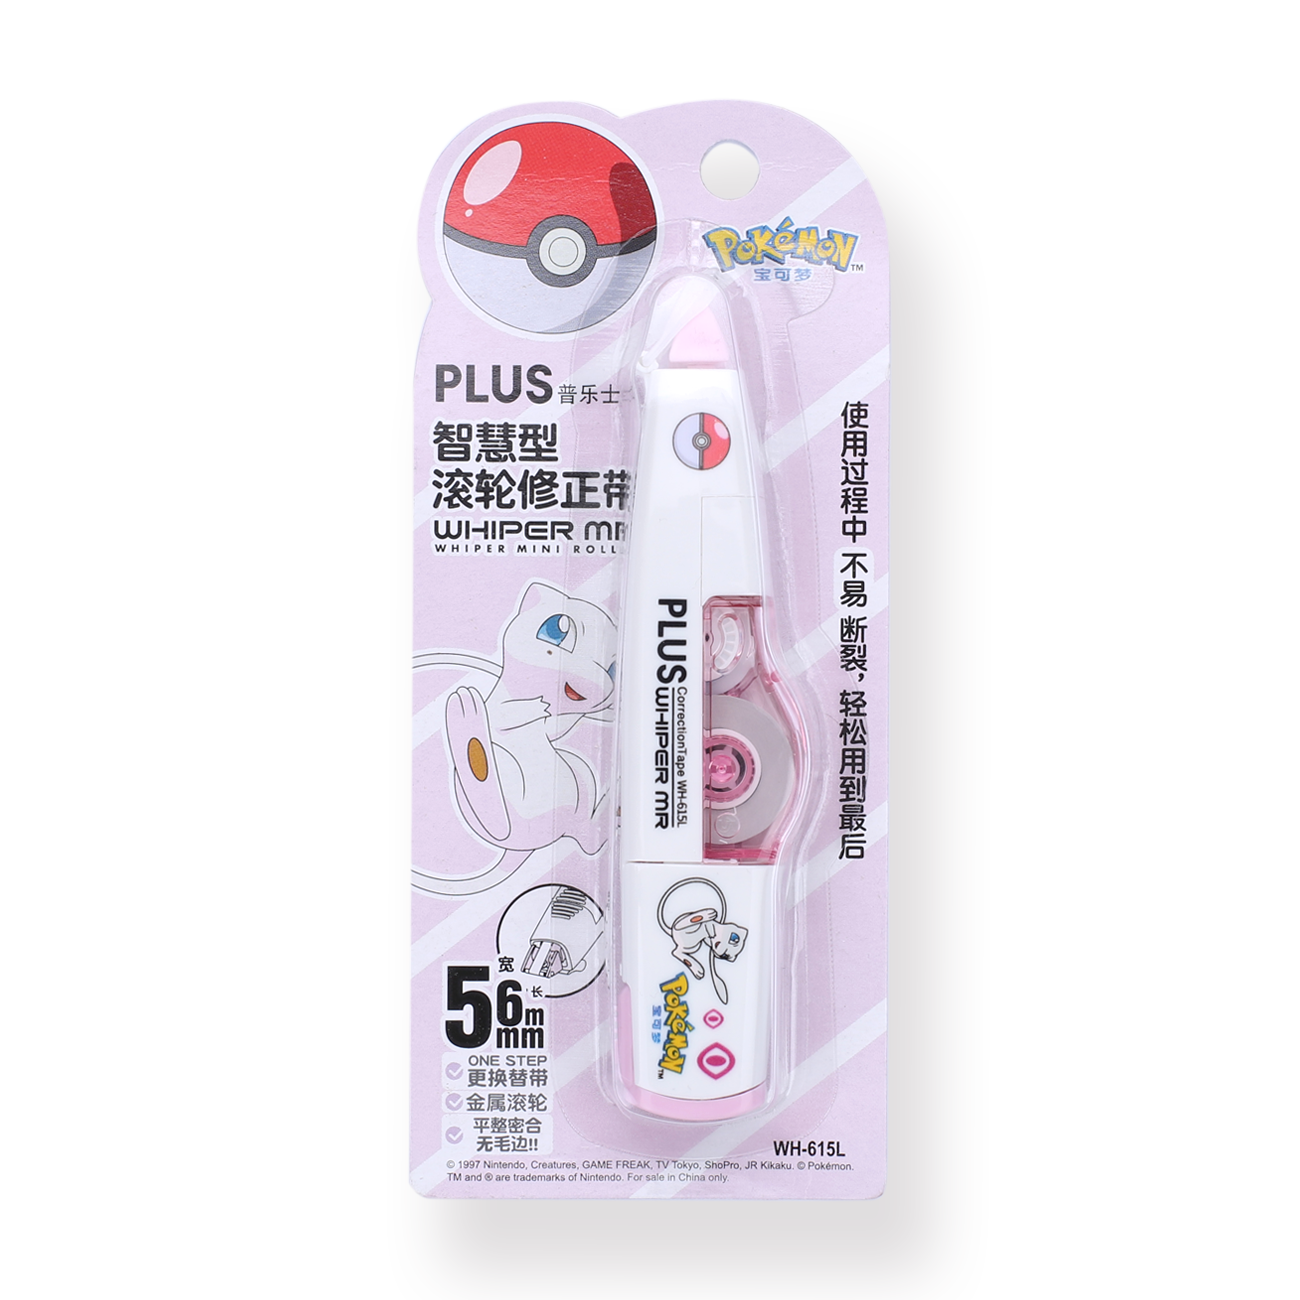 Plus Whiper Mr Limited Edition Correction Tape - Pokémon Series - Mew - Stationery Pal